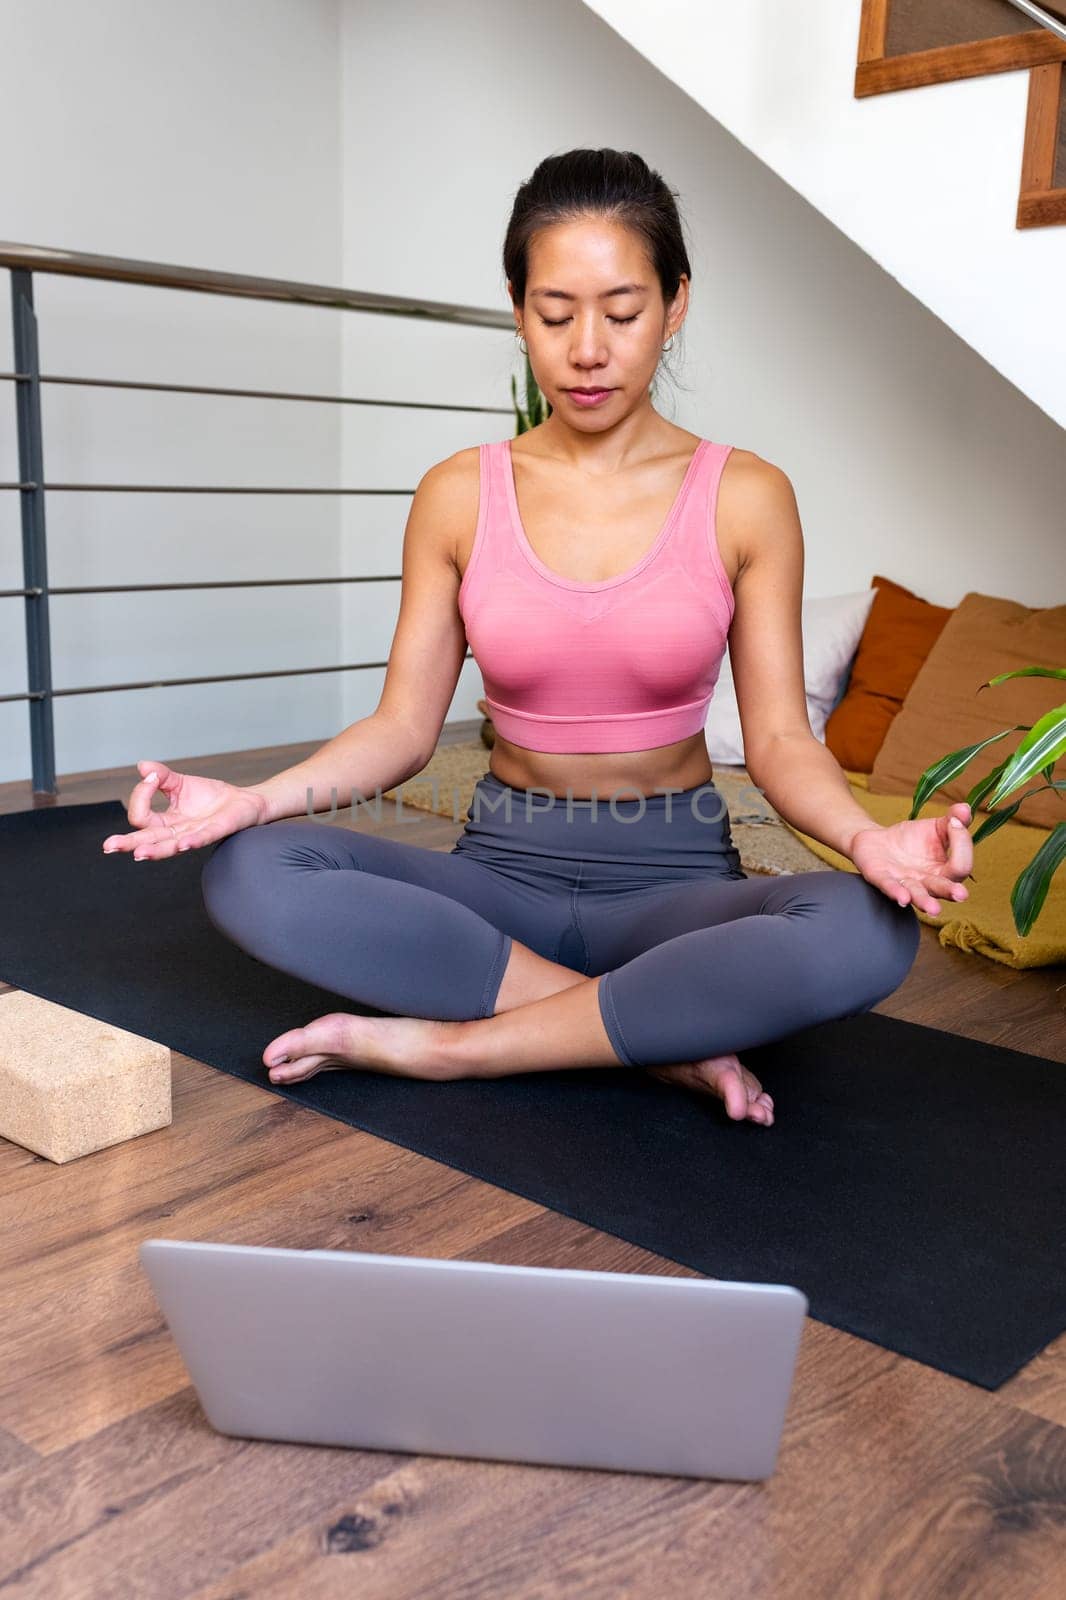 Young Asian woman meditating at home with online video meditation lesson using laptop. Vertical image. Healthy lifestyle concept.